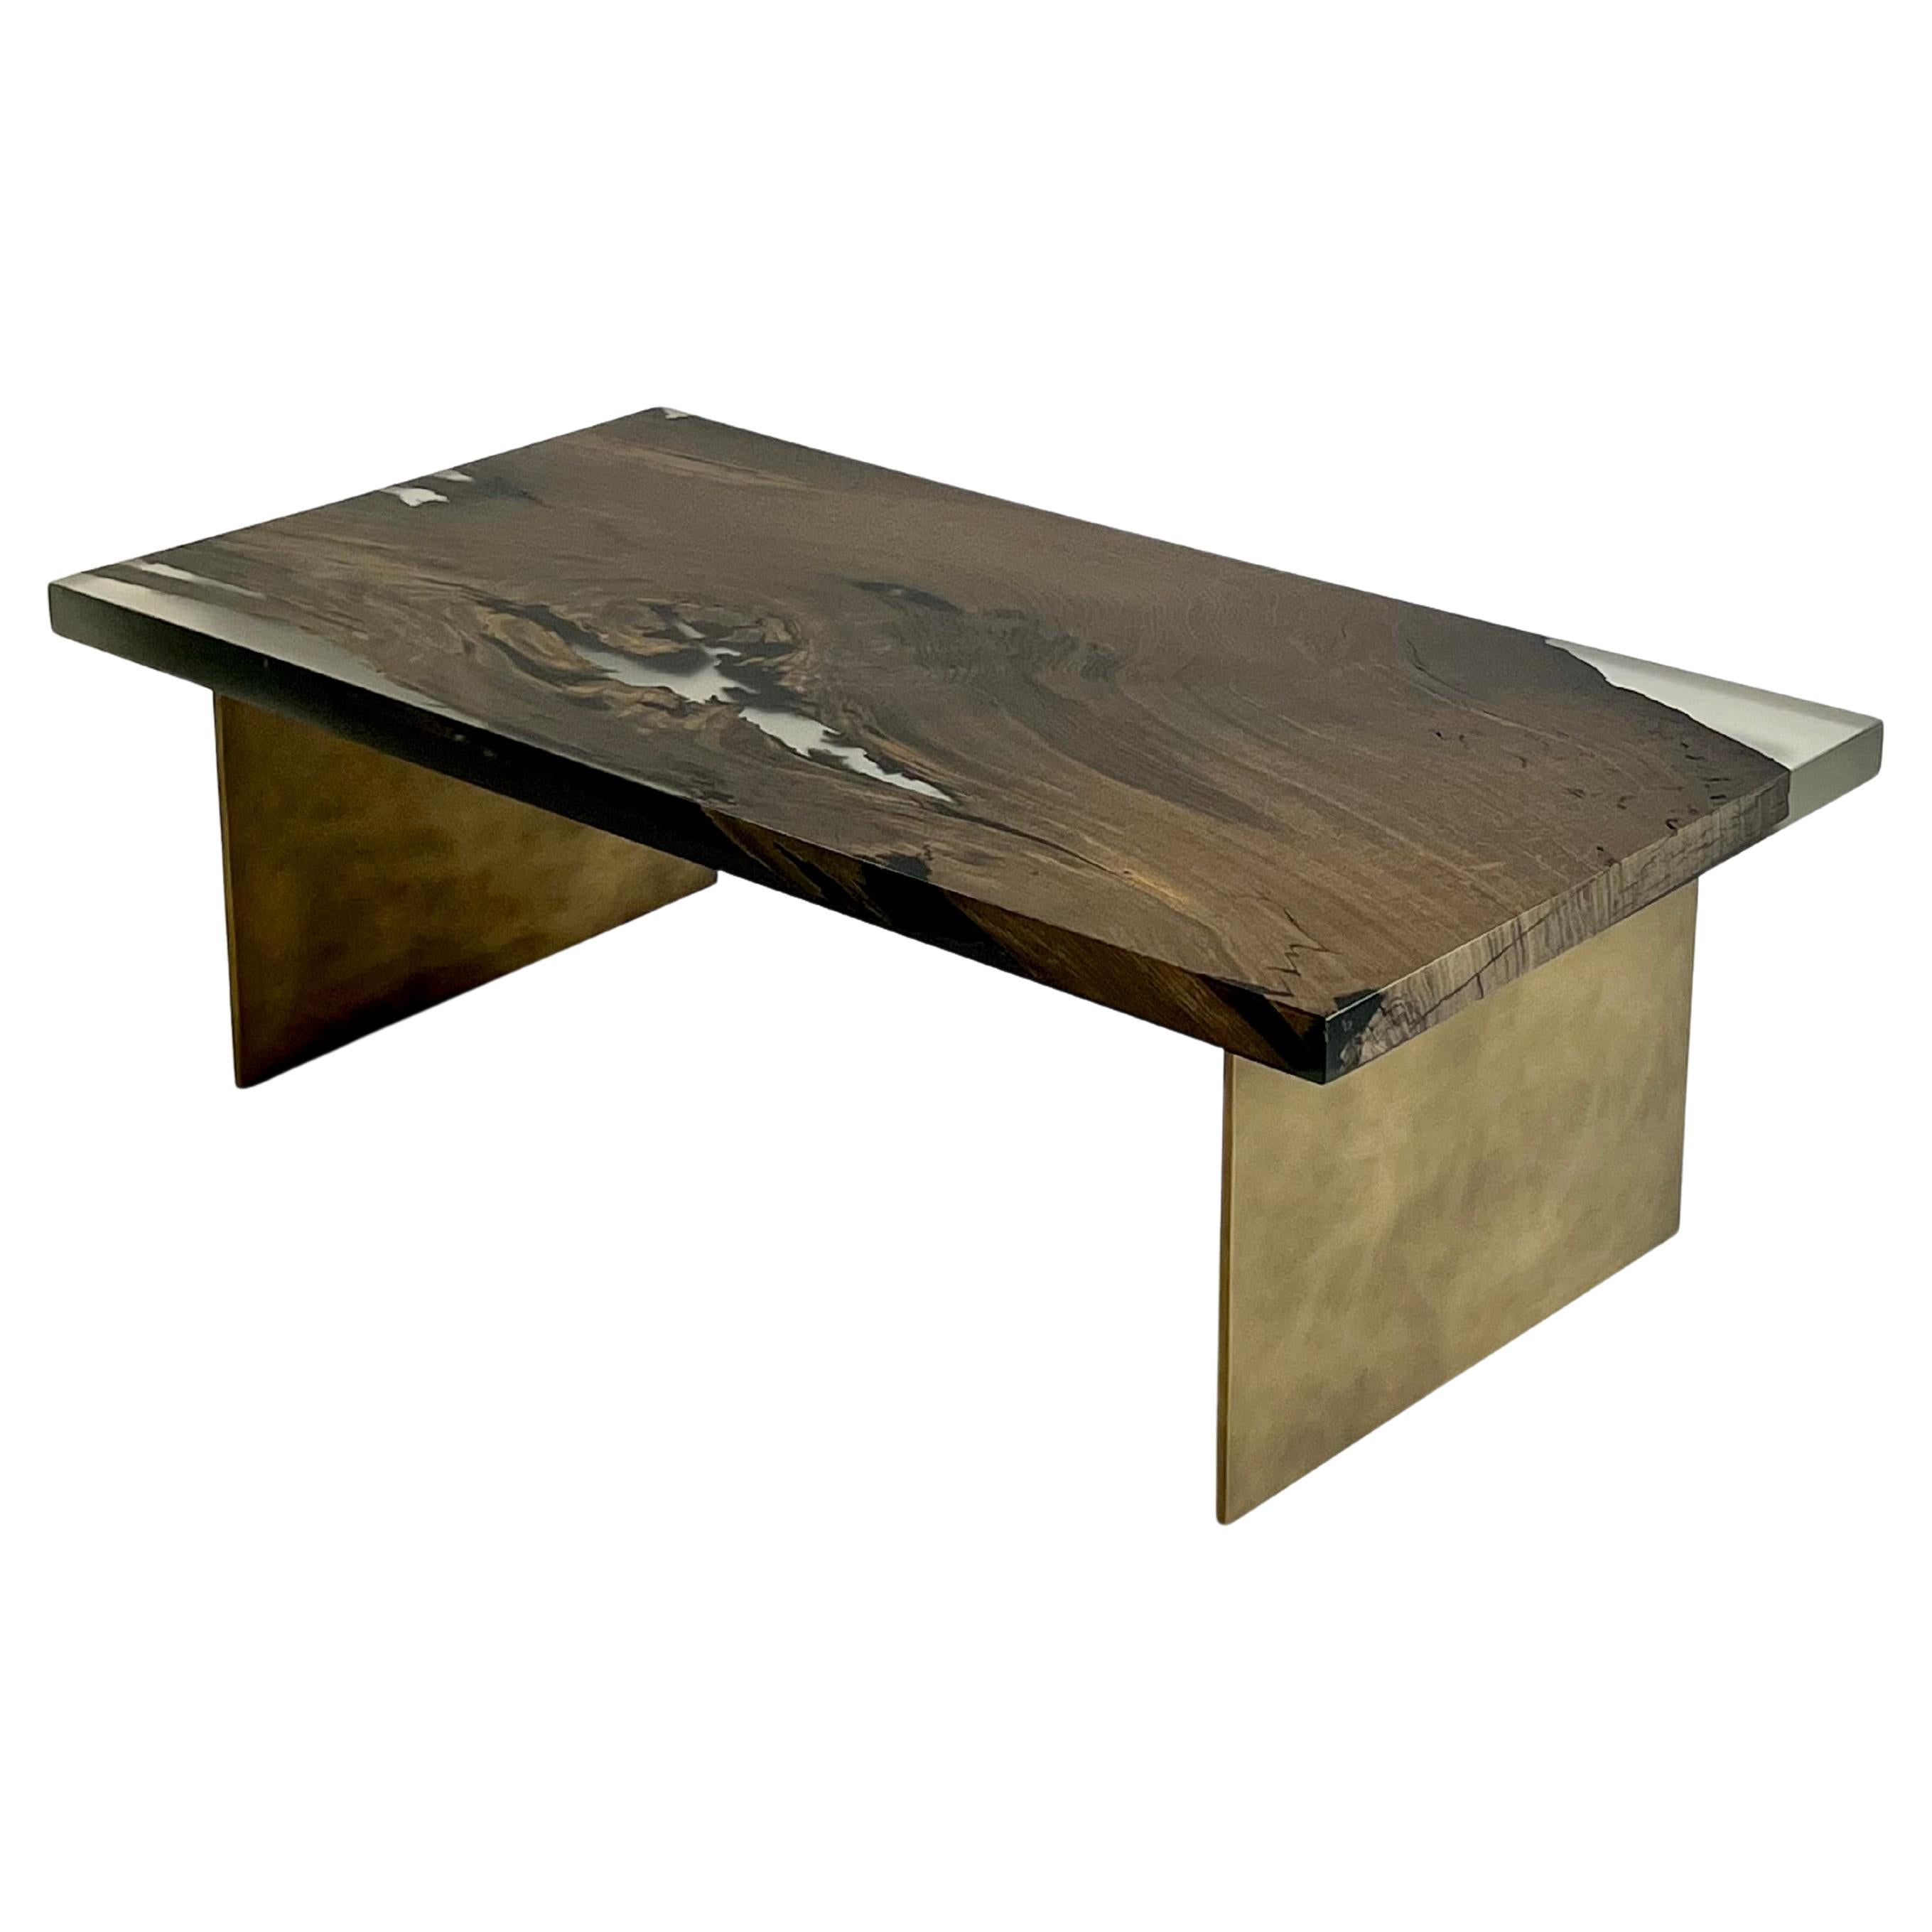 Handcrafted wooden coffee table For Sale